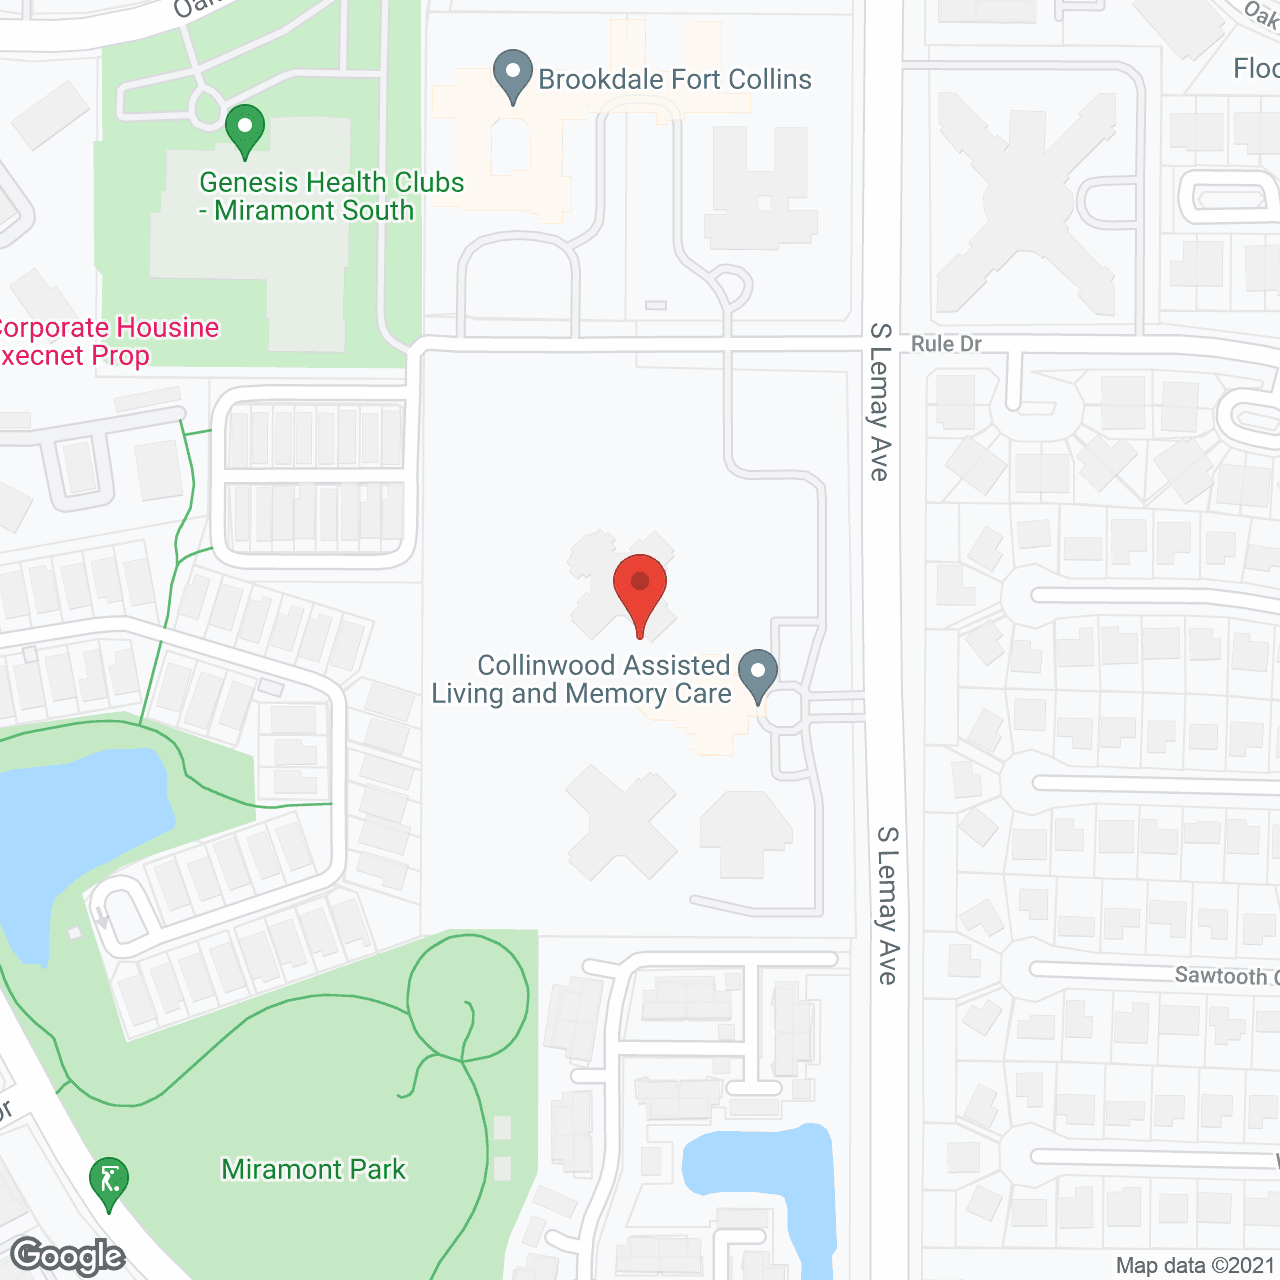 Collinwood Assisted Living and Memory Care in google map